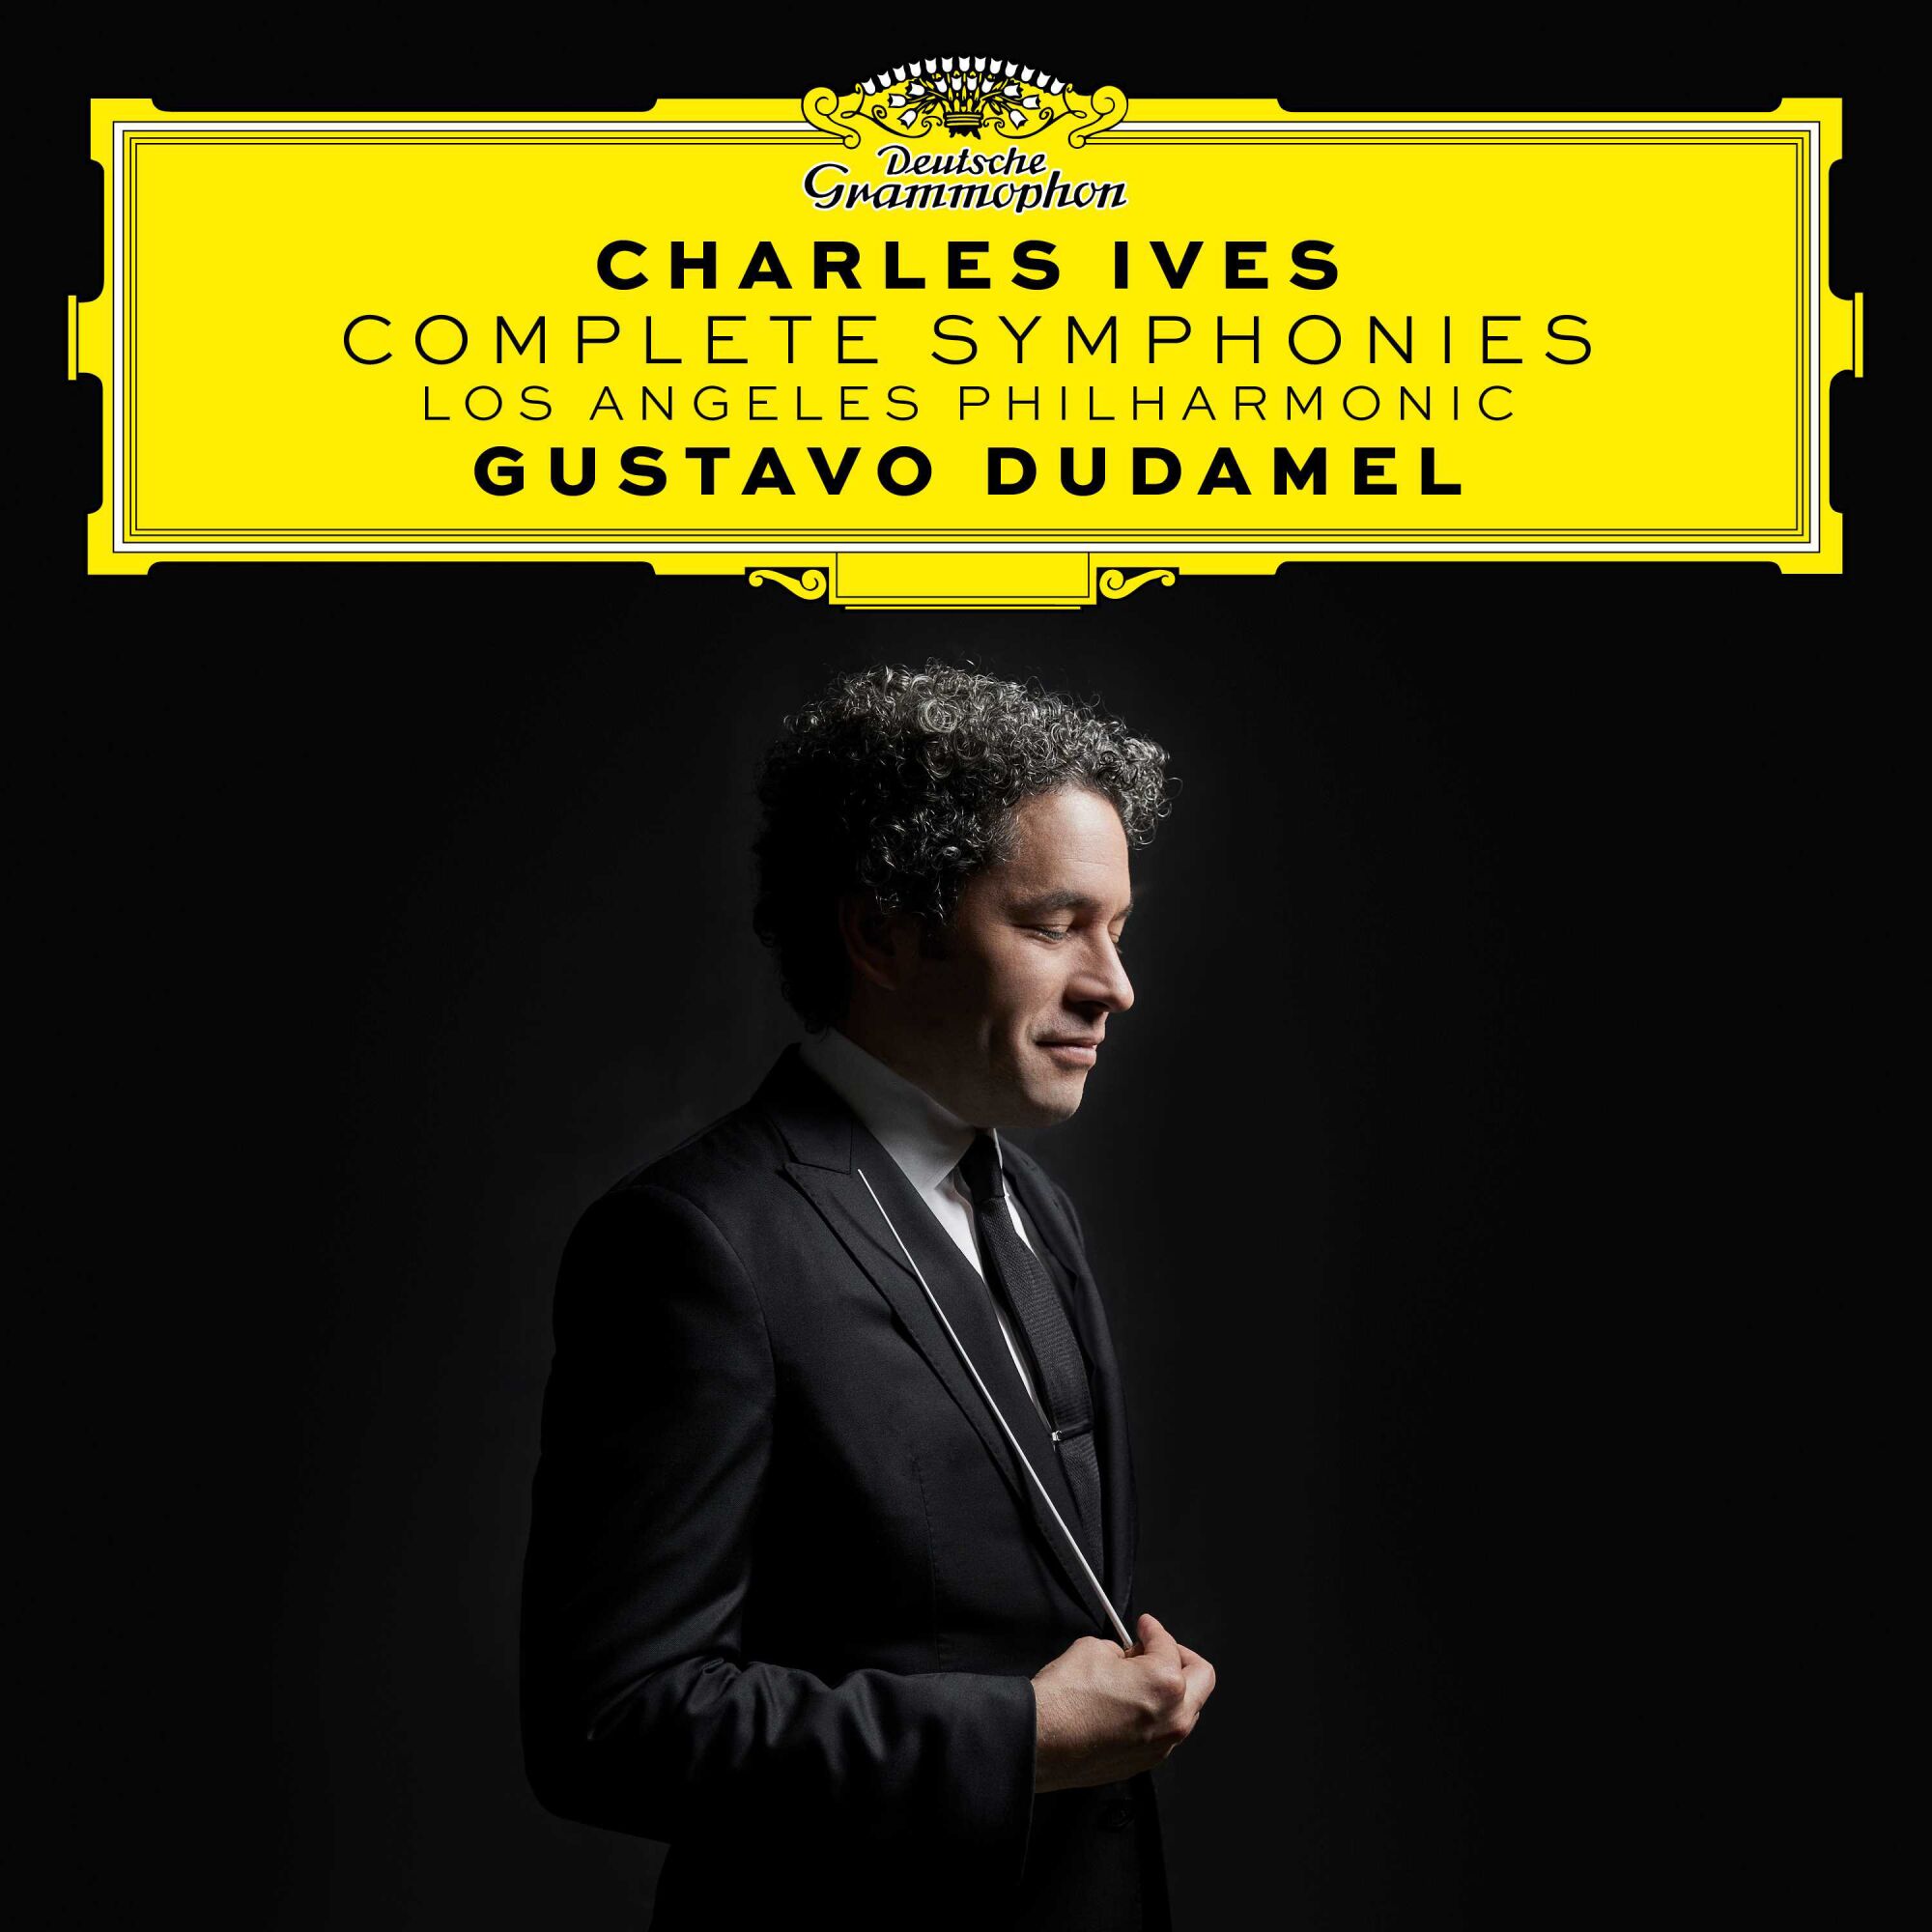 A CD of Charles Ives' complete symphonies, conducted by Gustavo Dudamel